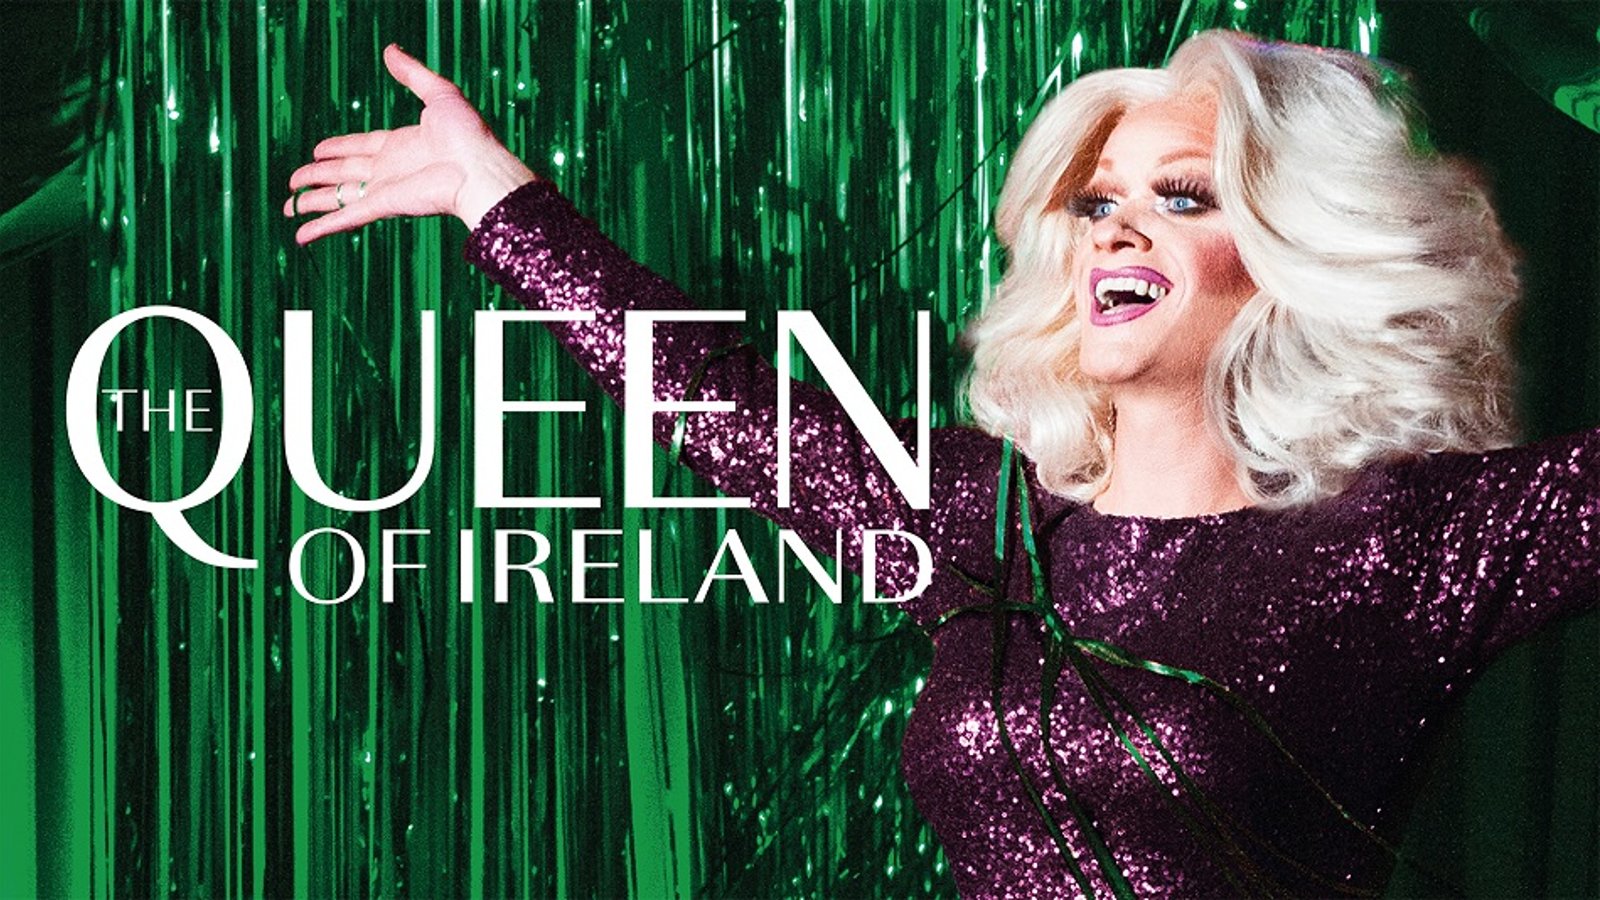 Queen of Ireland - The Life and Career of a Celebrated Irish Drag Queen